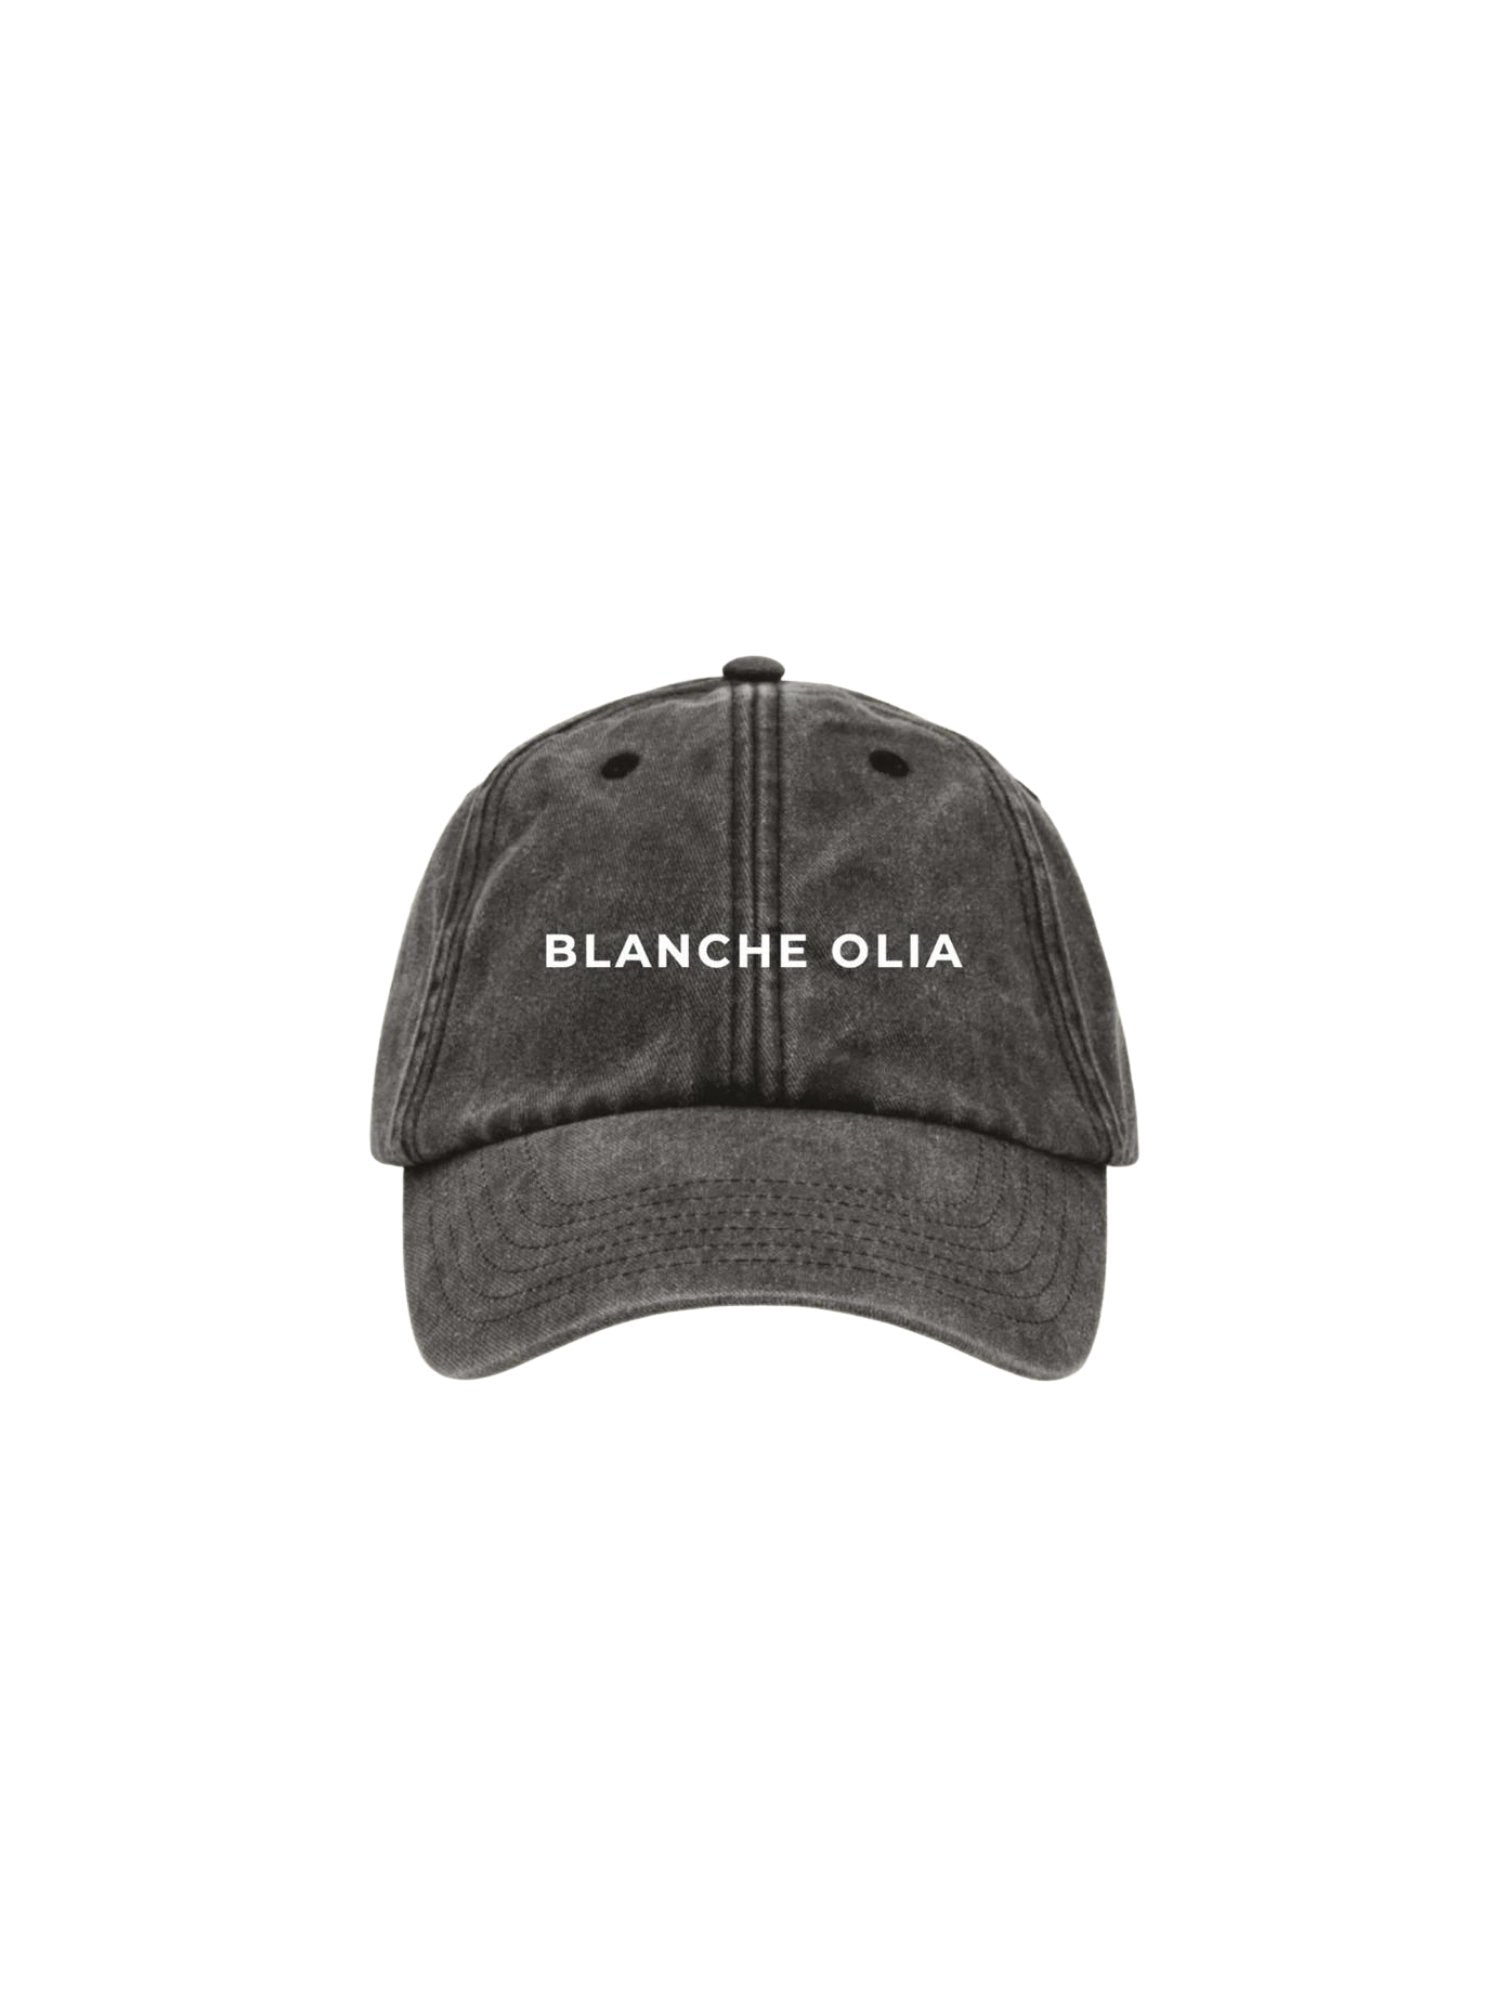 BO Cap charcoal ︴ hand-embroidered - Blanche Olia